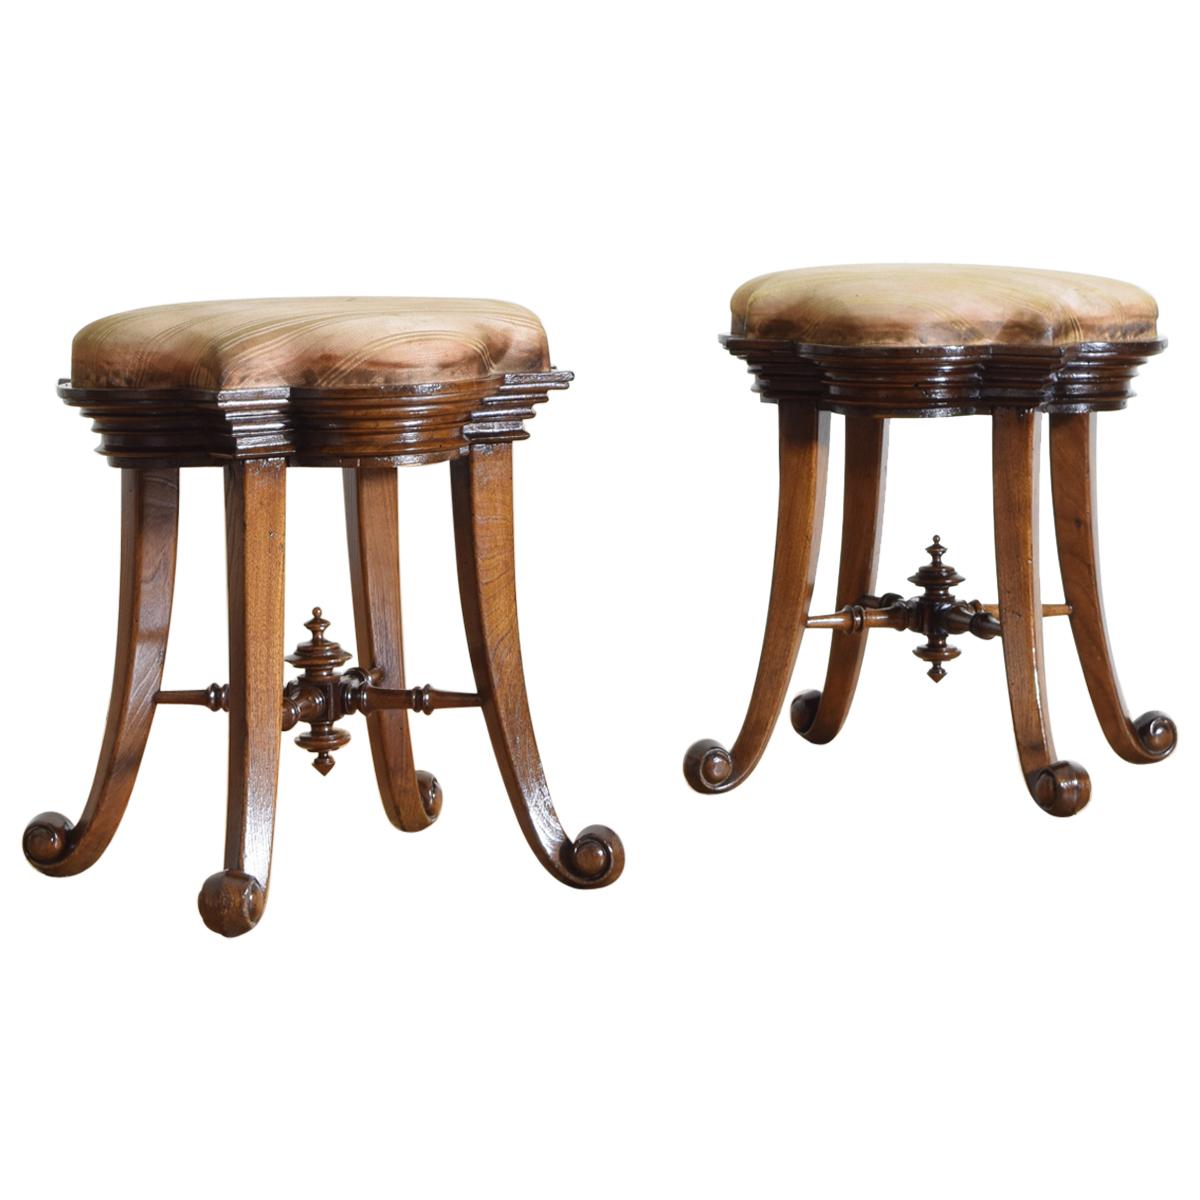 Pair of Spanish Art Nouveau Inspired Oak and Upholstered Stools